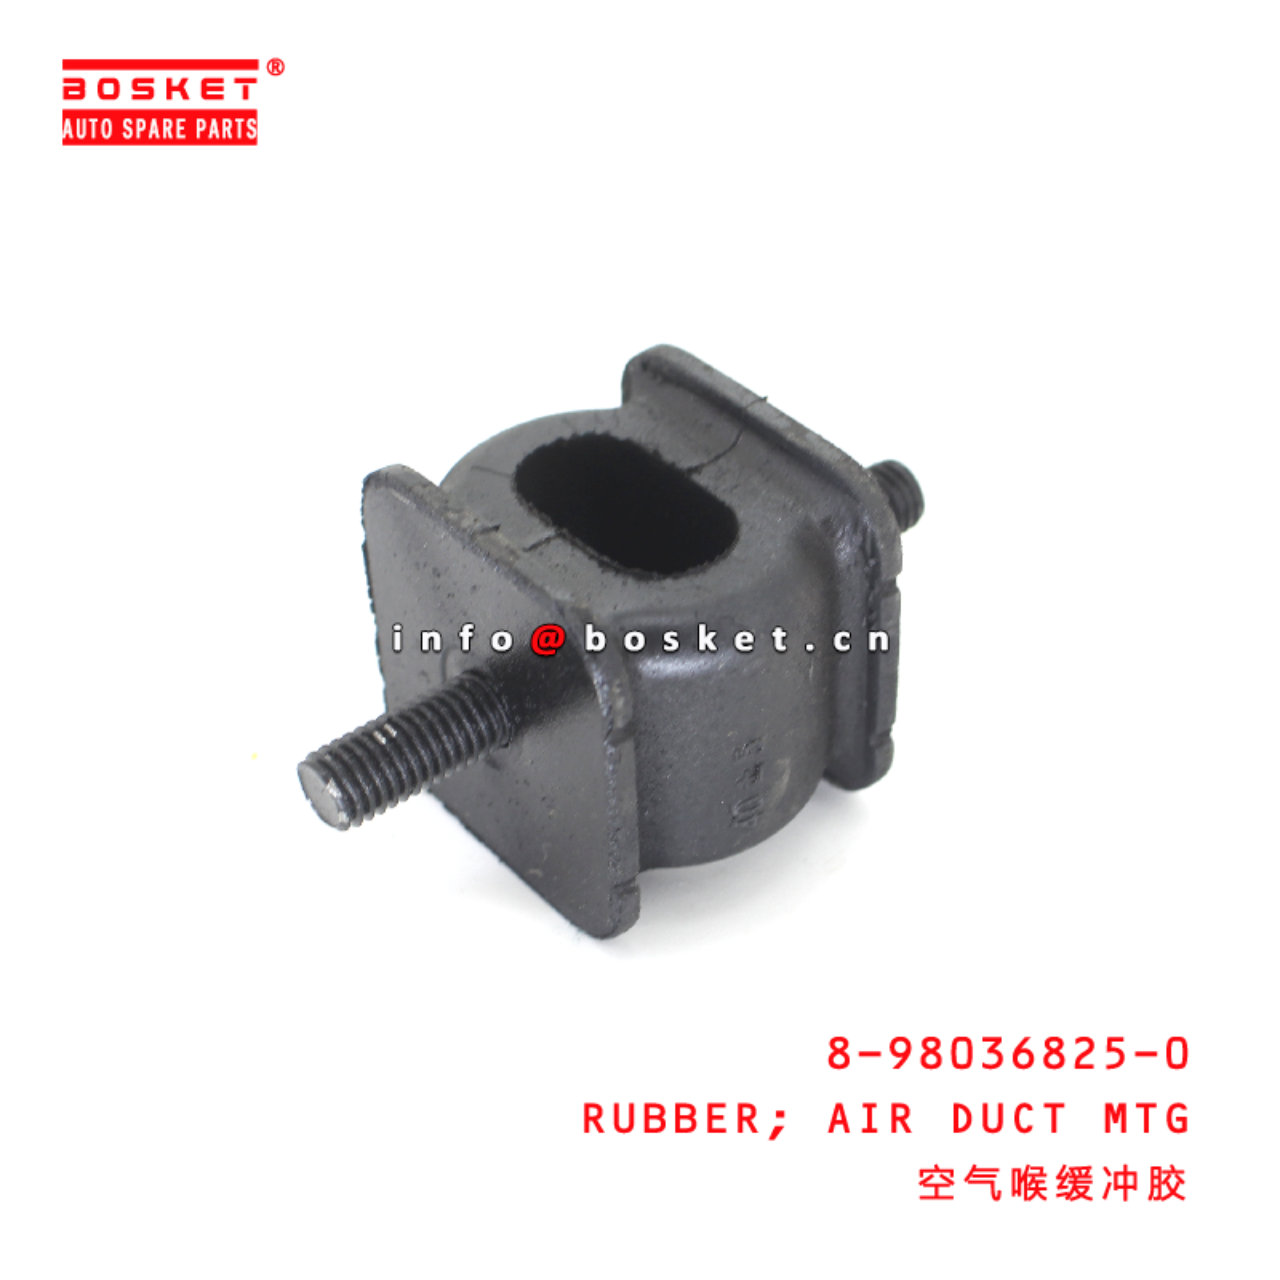 8-98036825-0 Air Duct Mounting Rubber suitable for ISUZU 700P 4HK1 8980368250